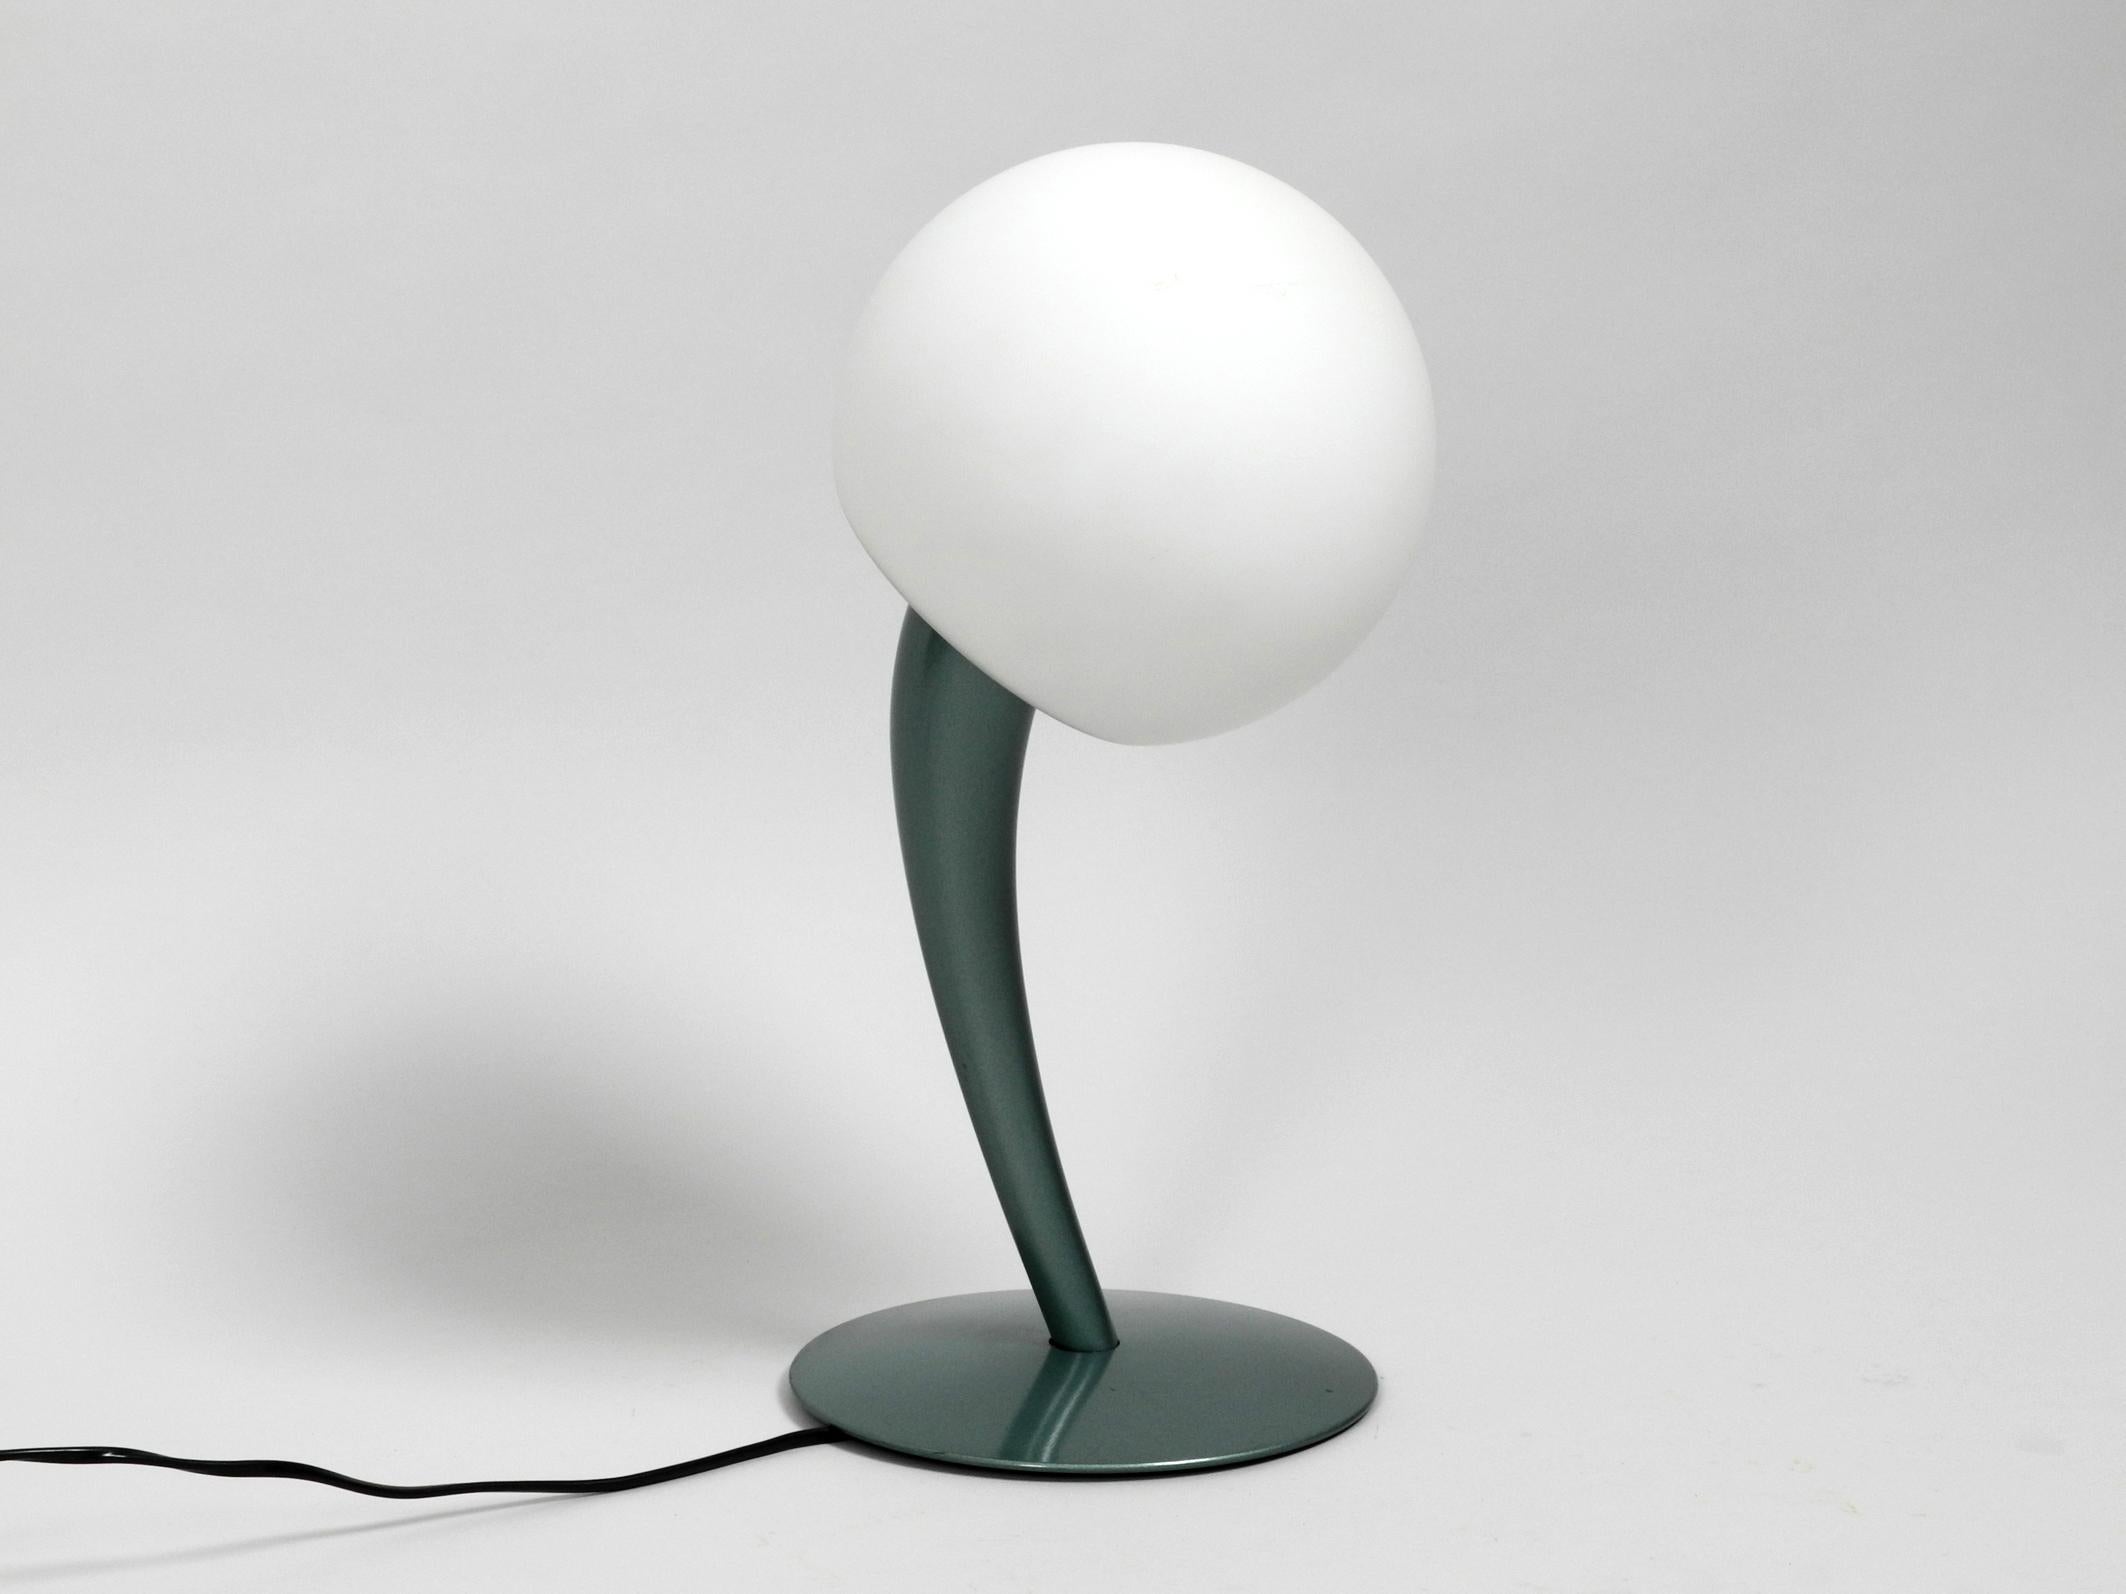 Great extraordinary table lamp from the 1980s or 1990s. Rare Minimalist design.
The lamp neck tends to the side, what gives the lamp an organic shape.
Frame is painted in typical 1980s blue green and is made entirely of metal.
Shade is made of